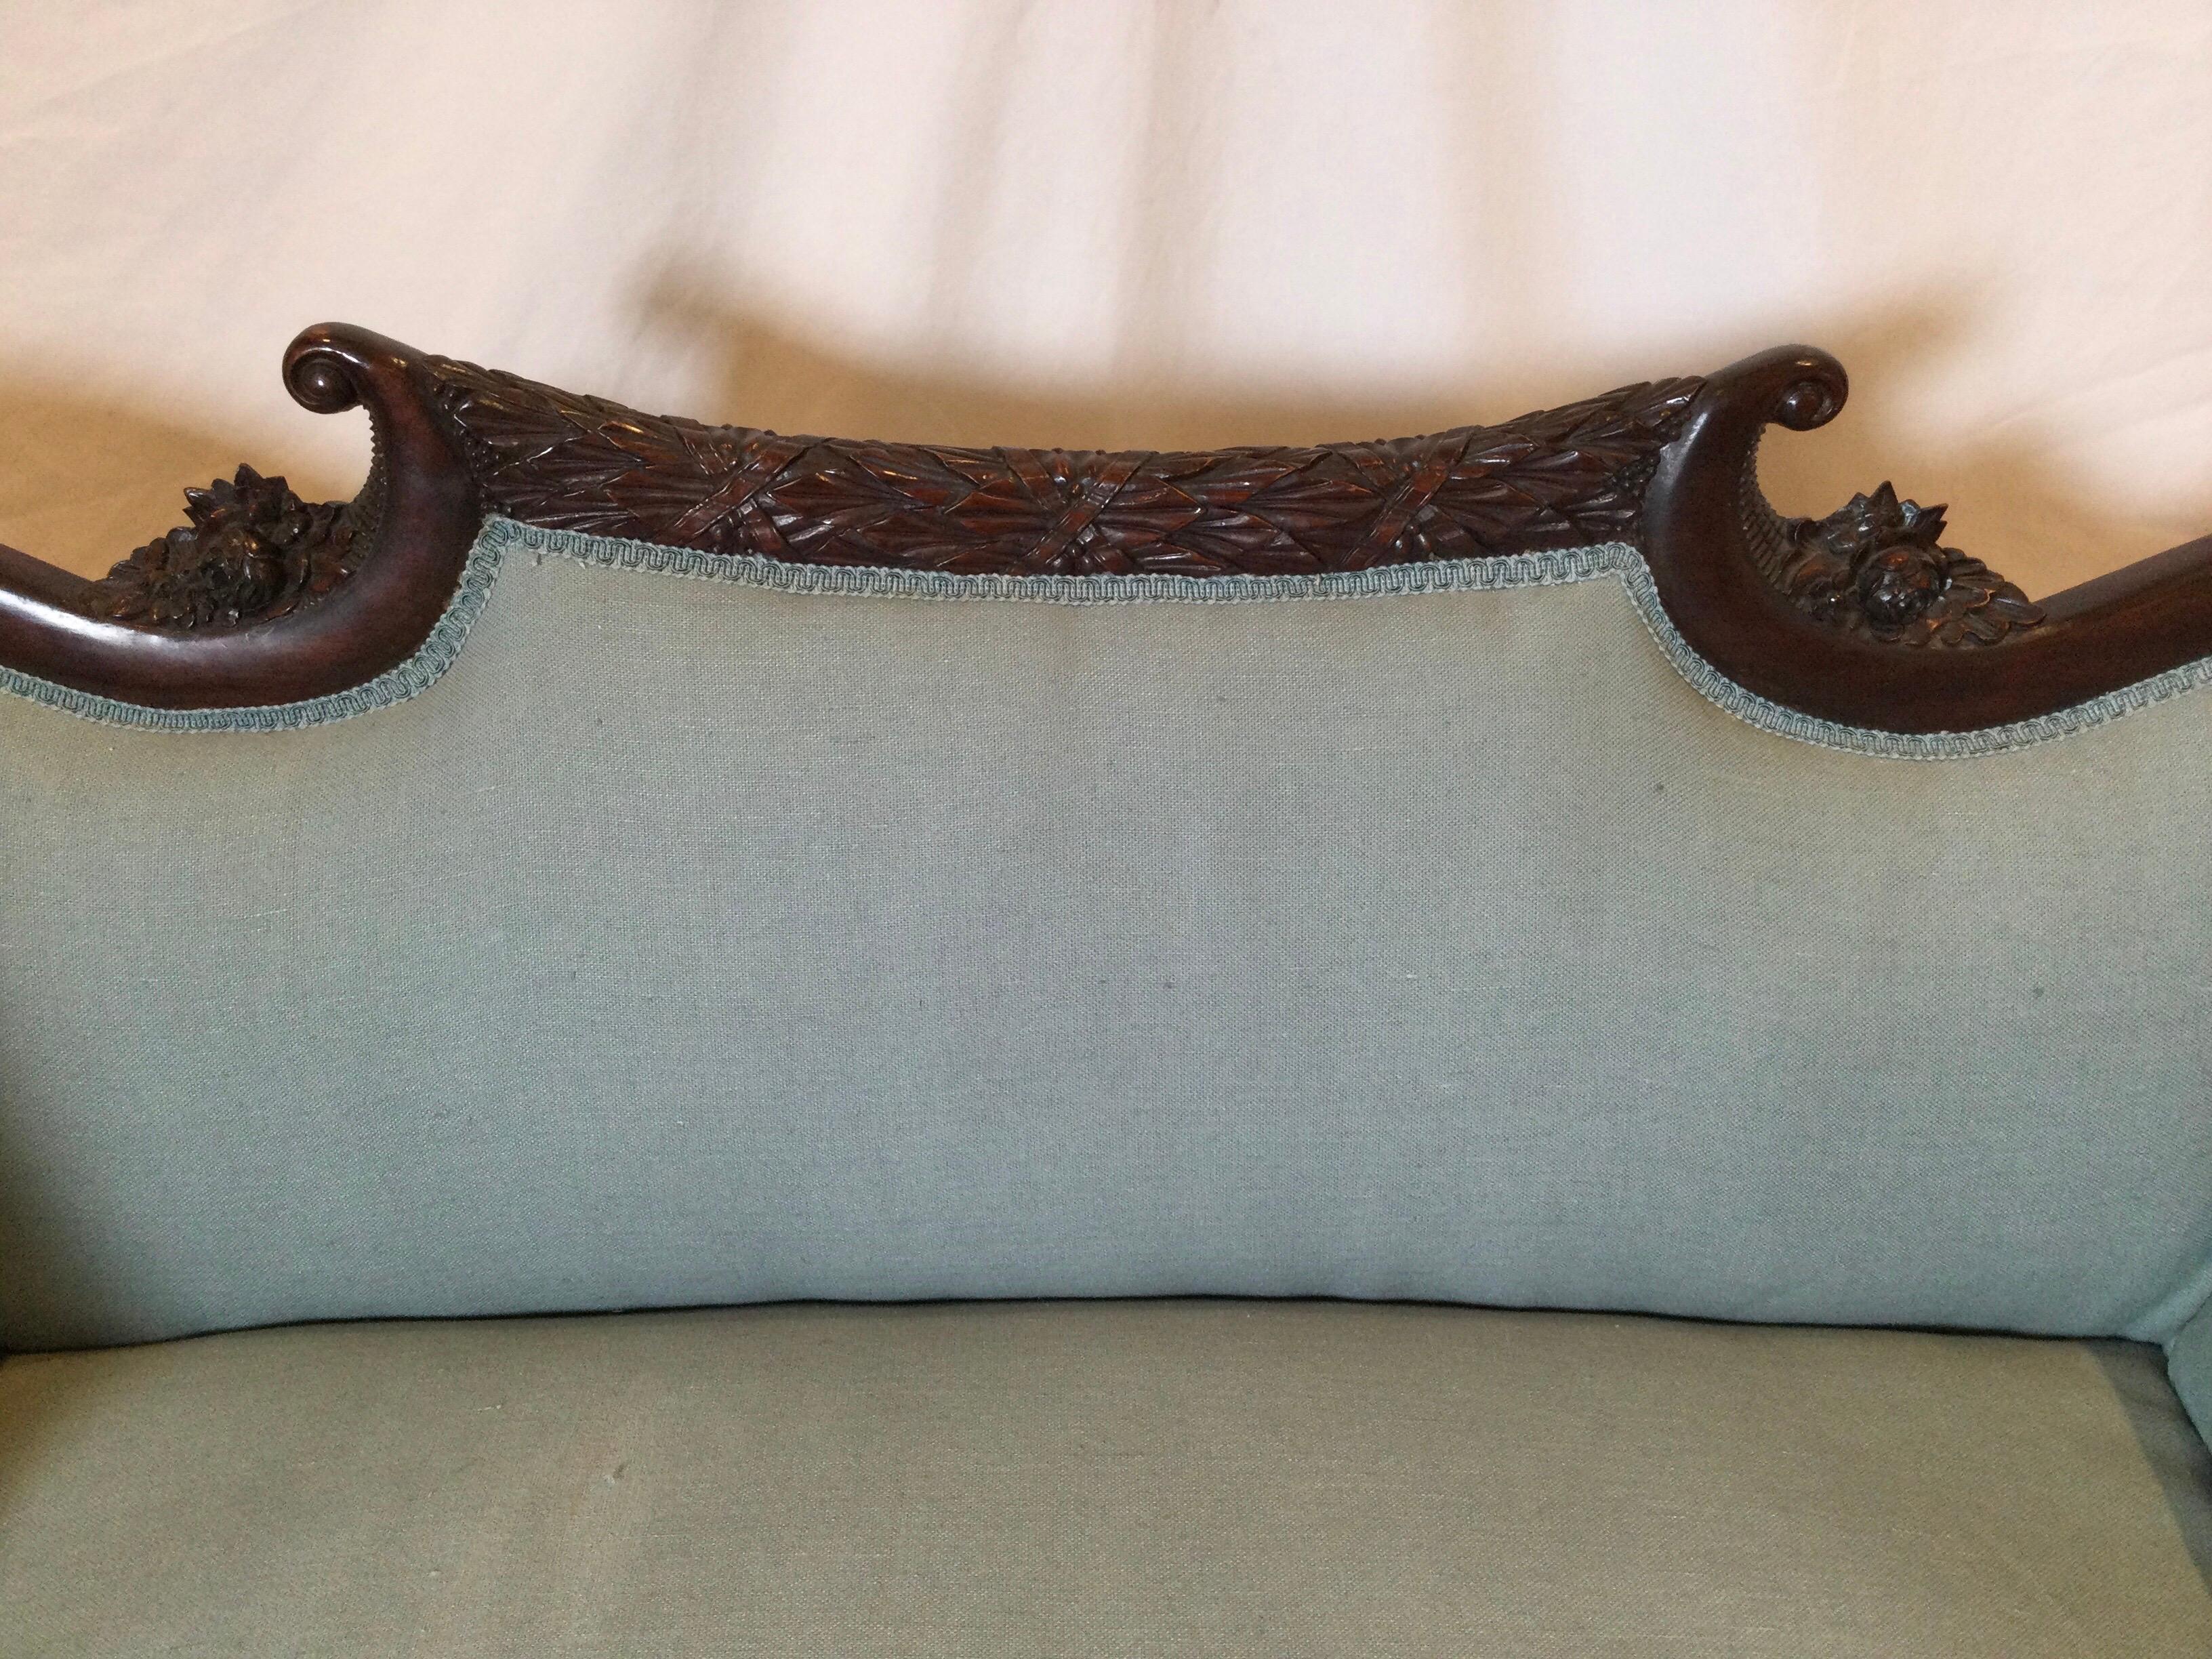 Graceful hand carved empire settee with new linen blend fabric. The beautifully carved dark mahogany frame with paw feet, attached back and seat, newly recovered. The medium grey blue fabric can easily be changed if desired. 

Measures: 54